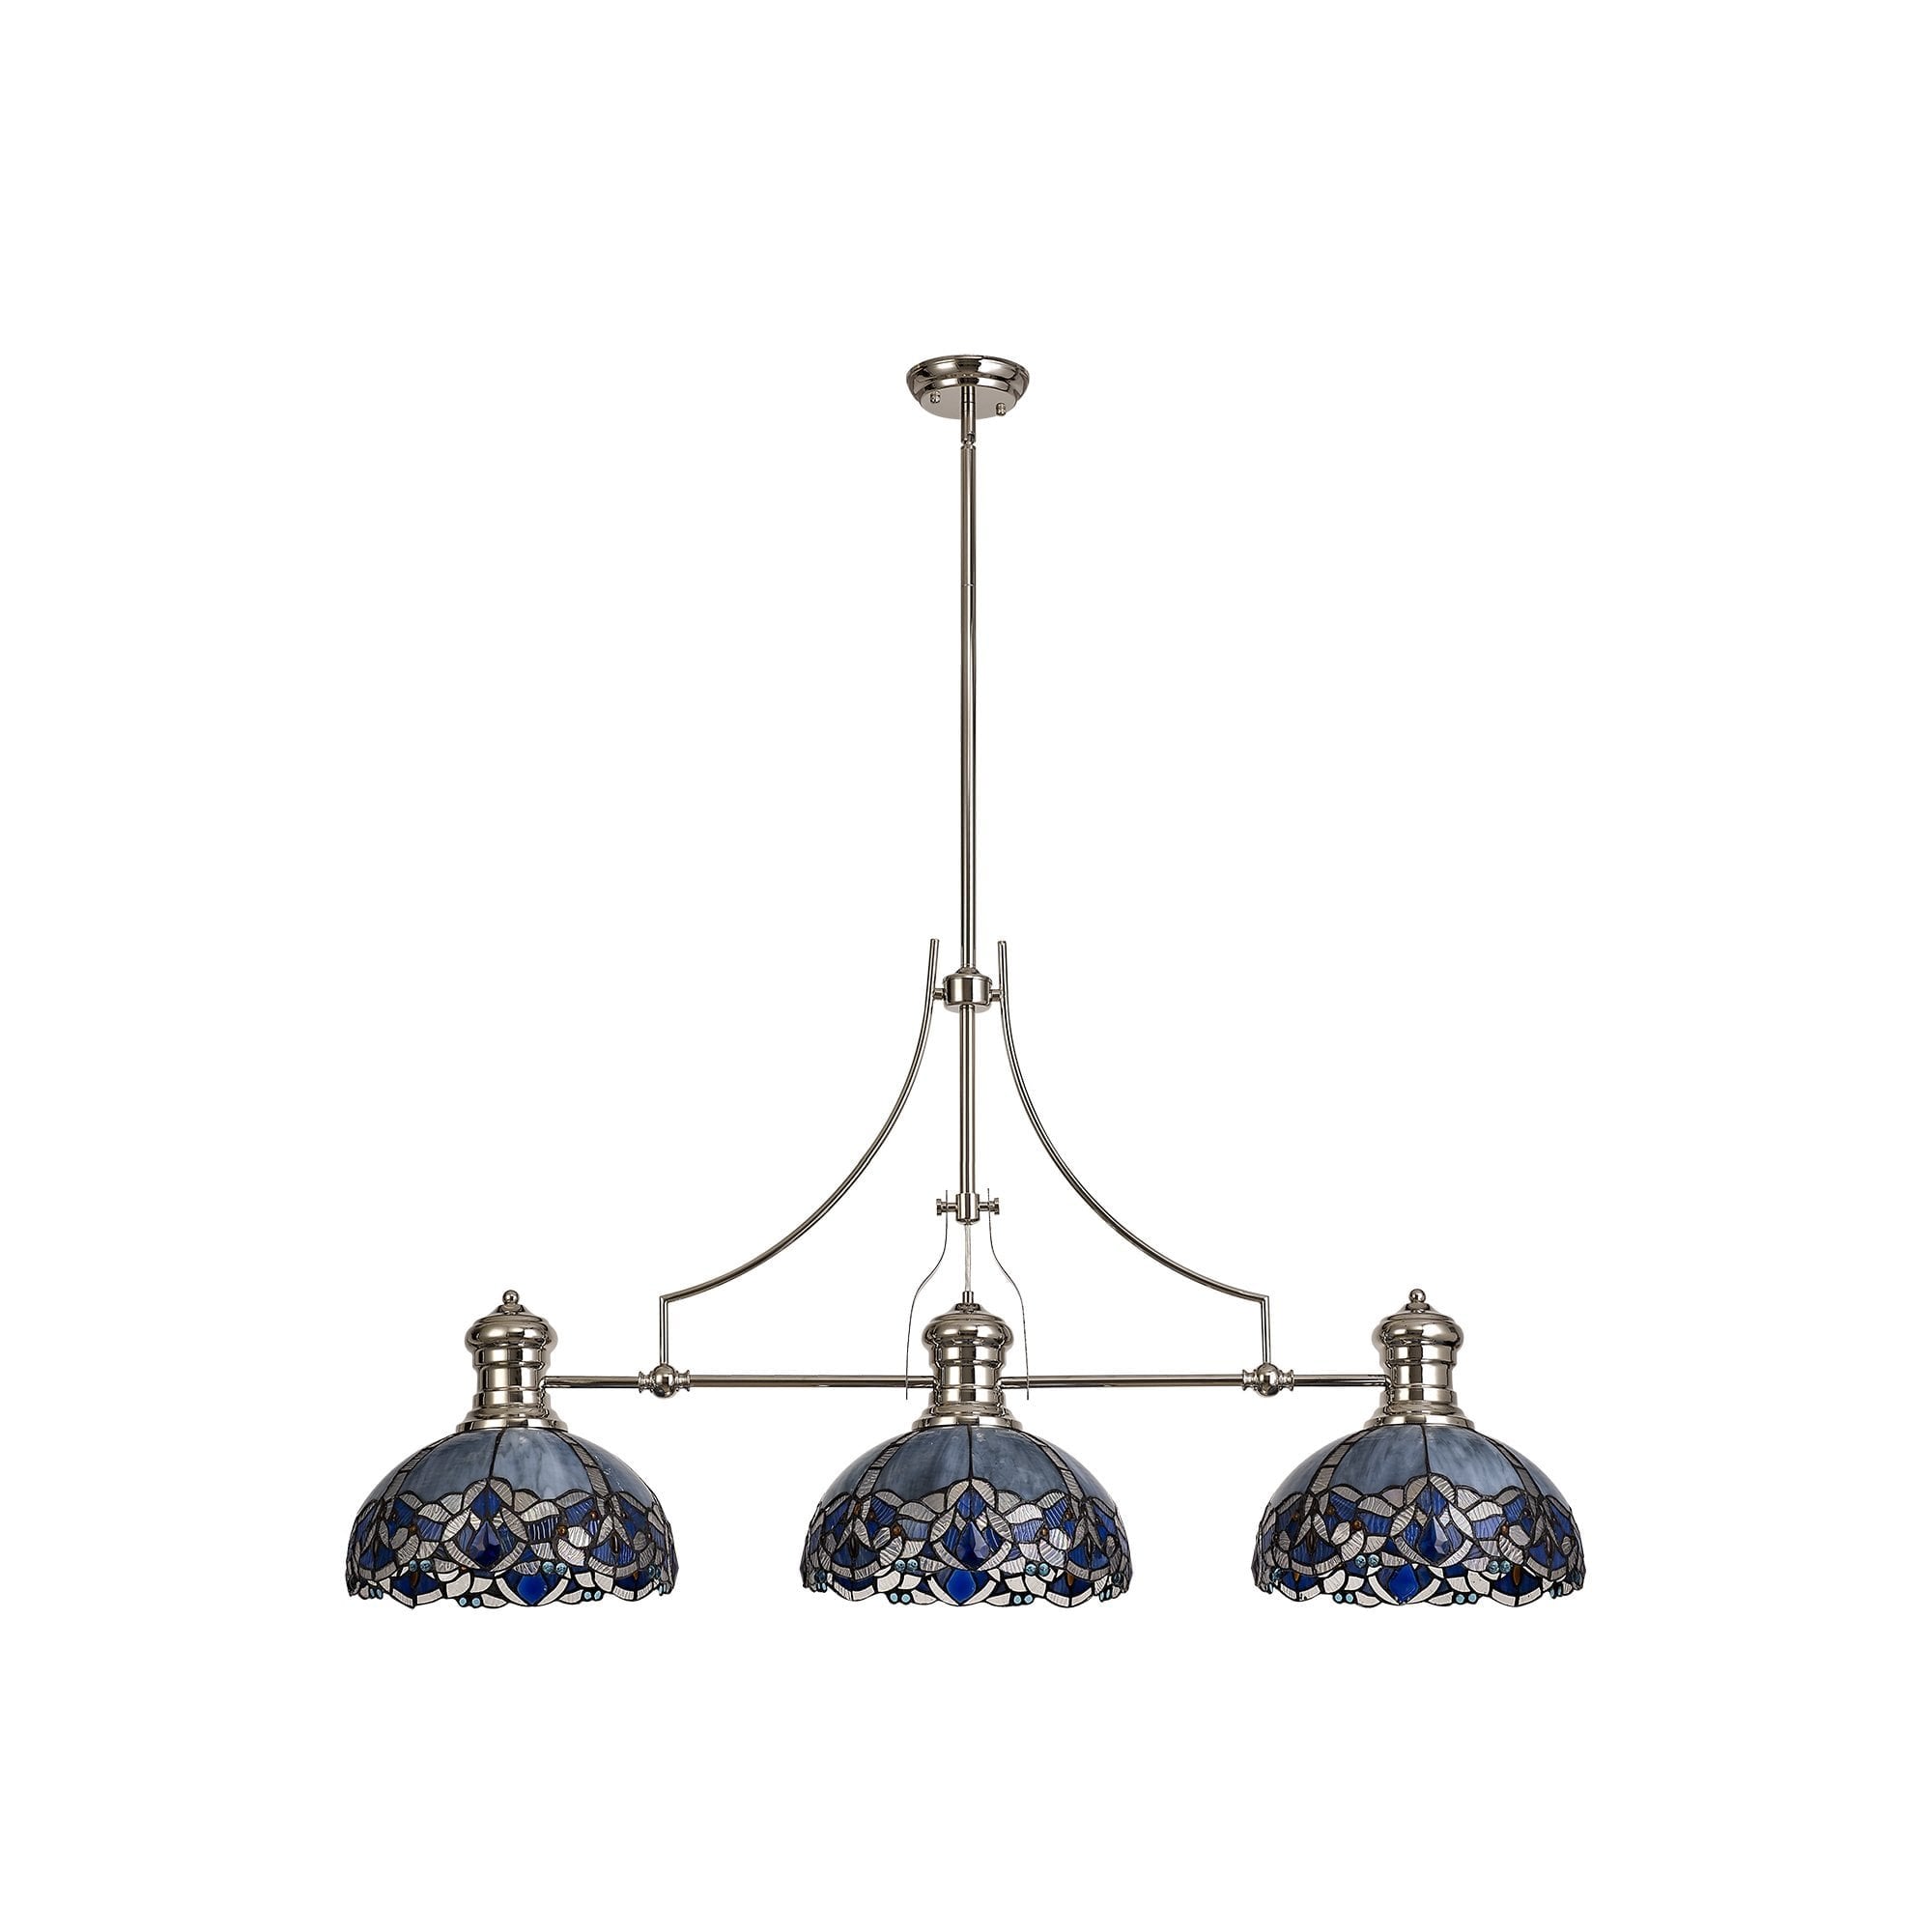 3 Light Telescopic Pendant E27 With 30cm Tiffany Shade, Polished Nickel/Blue/Clear Crystal